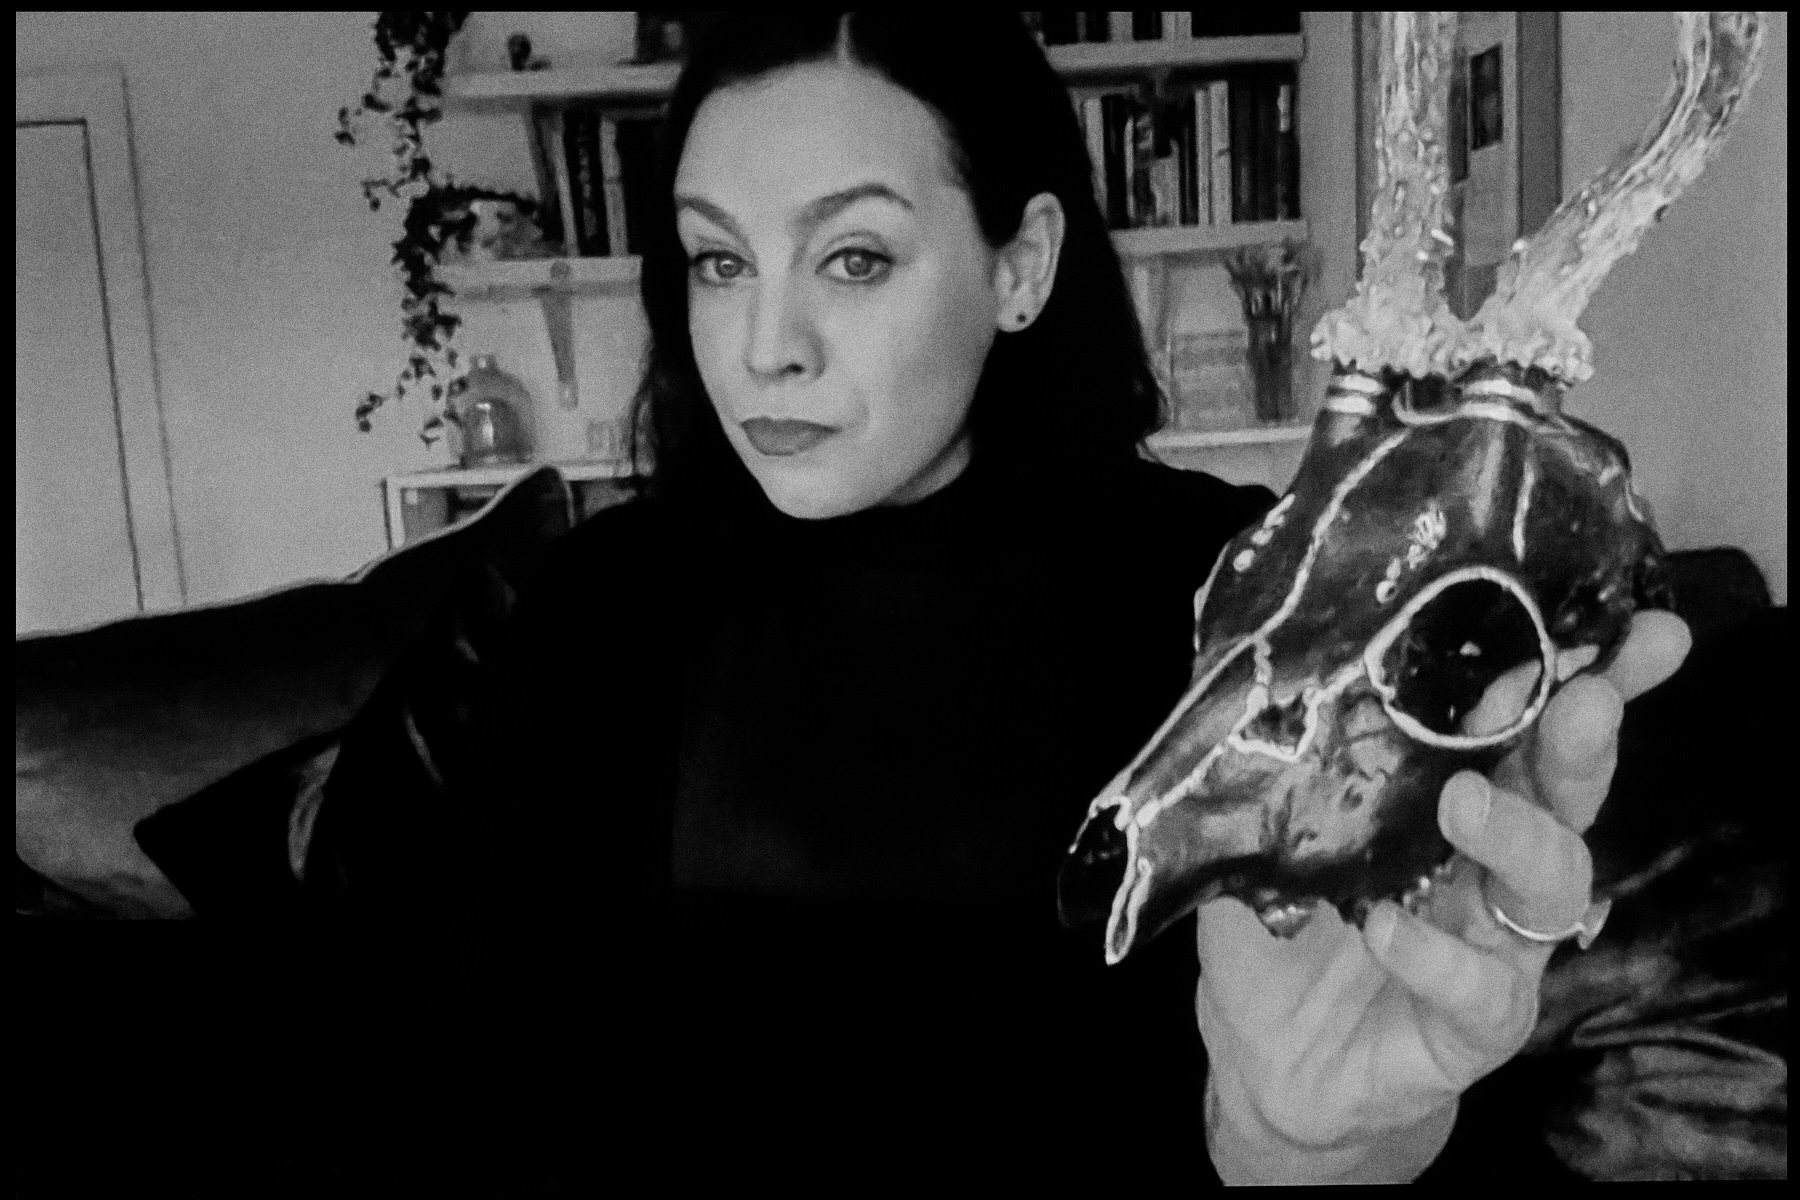 A portrait of Jenni Fagan with a horned skull 